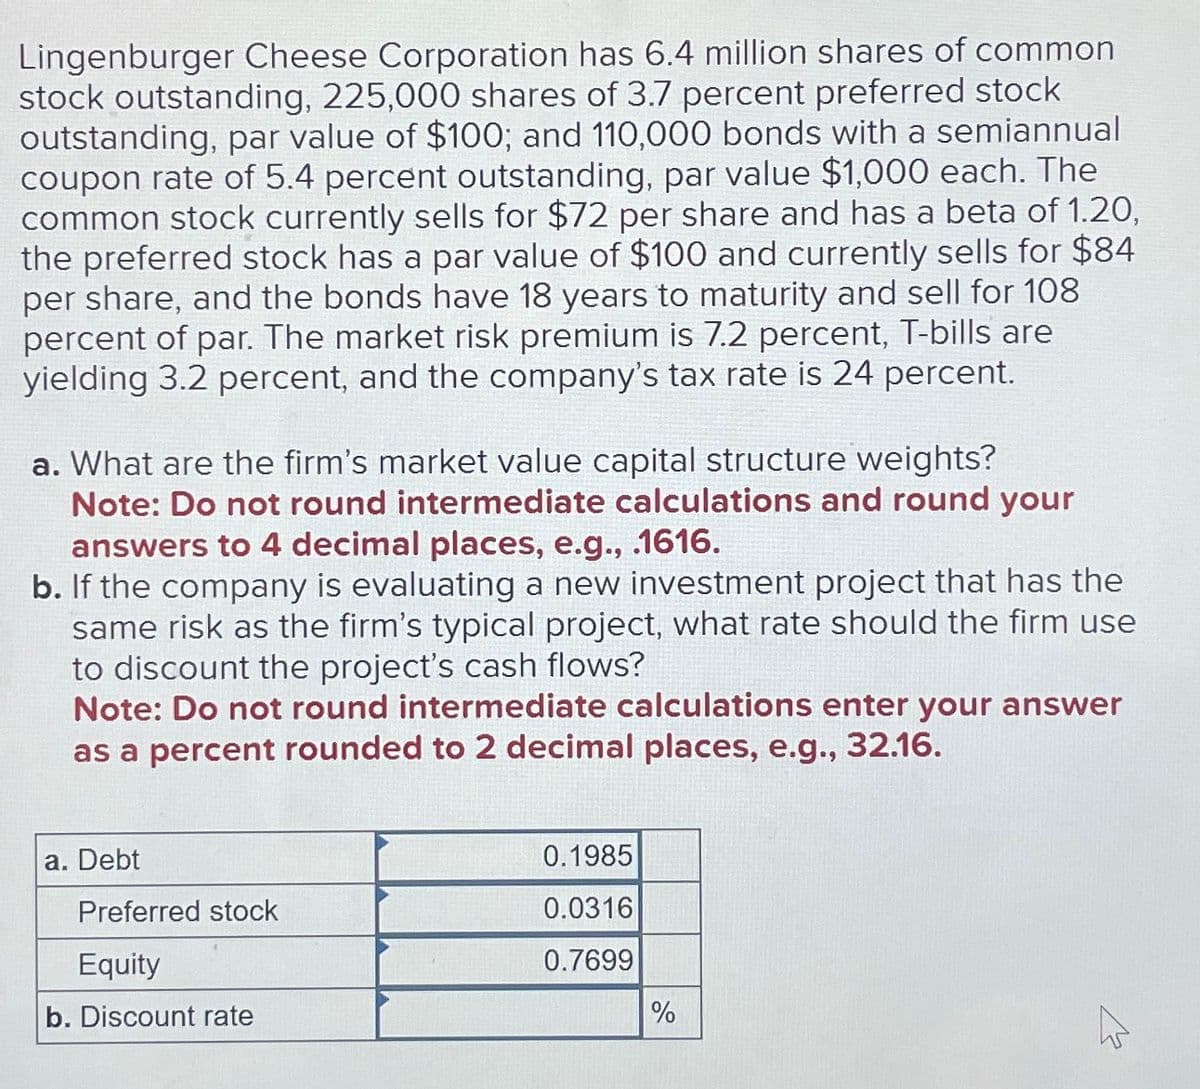 Lingenburger Cheese Corporation has 6.4 million shares of common
stock outstanding, 225,000 shares of 3.7 percent preferred stock
outstanding, par value of $100; and 110,000 bonds with a semiannual
coupon rate of 5.4 percent outstanding, par value $1,000 each. The
common stock currently sells for $72 per share and has a beta of 1.20,
the preferred stock has a par value of $100 and currently sells for $84
per share, and the bonds have 18 years to maturity and sell for 108
percent of par. The market risk premium is 7.2 percent, T-bills are
yielding 3.2 percent, and the company's tax rate is 24 percent.
a. What are the firm's market value capital structure weights?
Note: Do not round intermediate calculations and round your
answers to 4 decimal places, e.g., .1616.
b. If the company is evaluating a new investment project that has the
same risk as the firm's typical project, what rate should the firm use
to discount the project's cash flows?
Note: Do not round intermediate calculations enter your answer
as a percent rounded to 2 decimal places, e.g., 32.16.
a. Debt
0.1985
Preferred stock
0.0316
Equity
0.7699
b. Discount rate
%
W